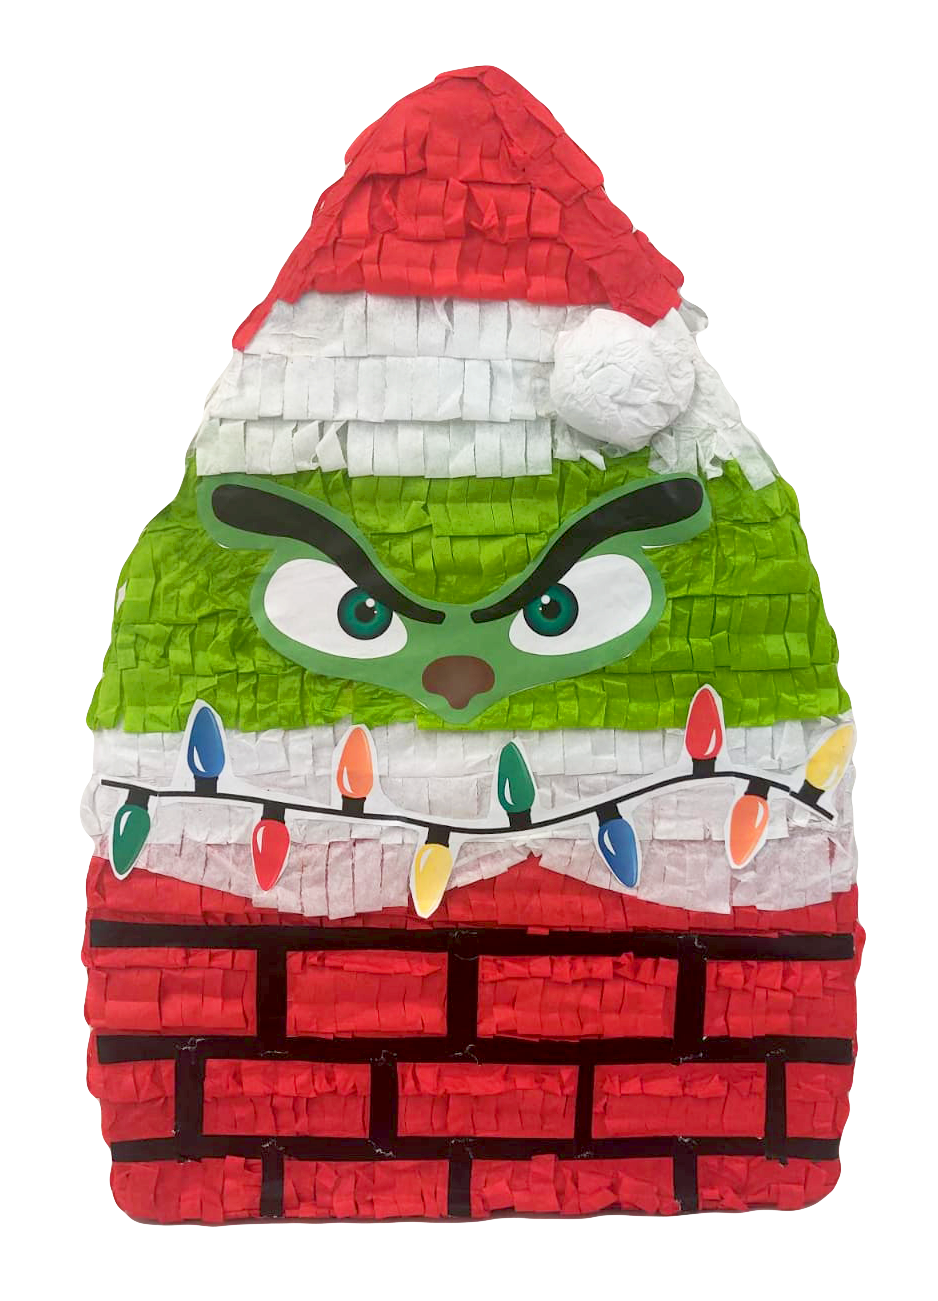 Green Goblin Pinata For Christmas Party Game, Christmas Decorations